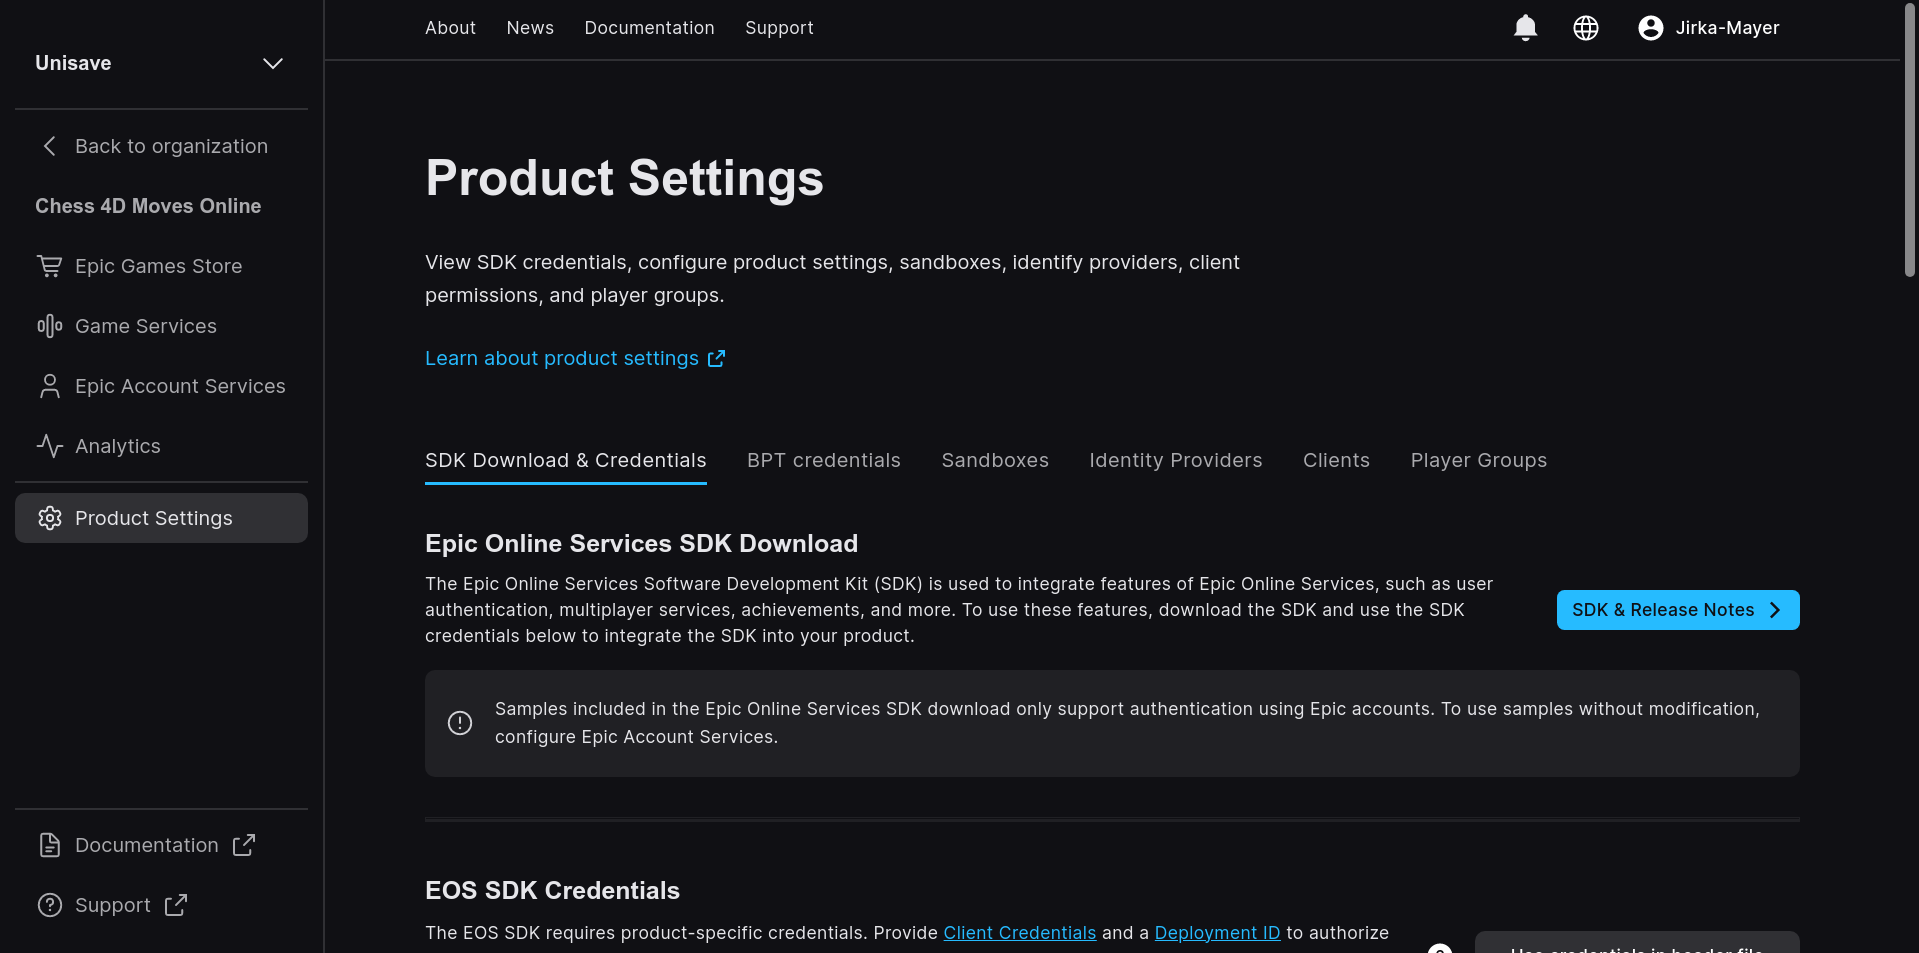 Product settings page